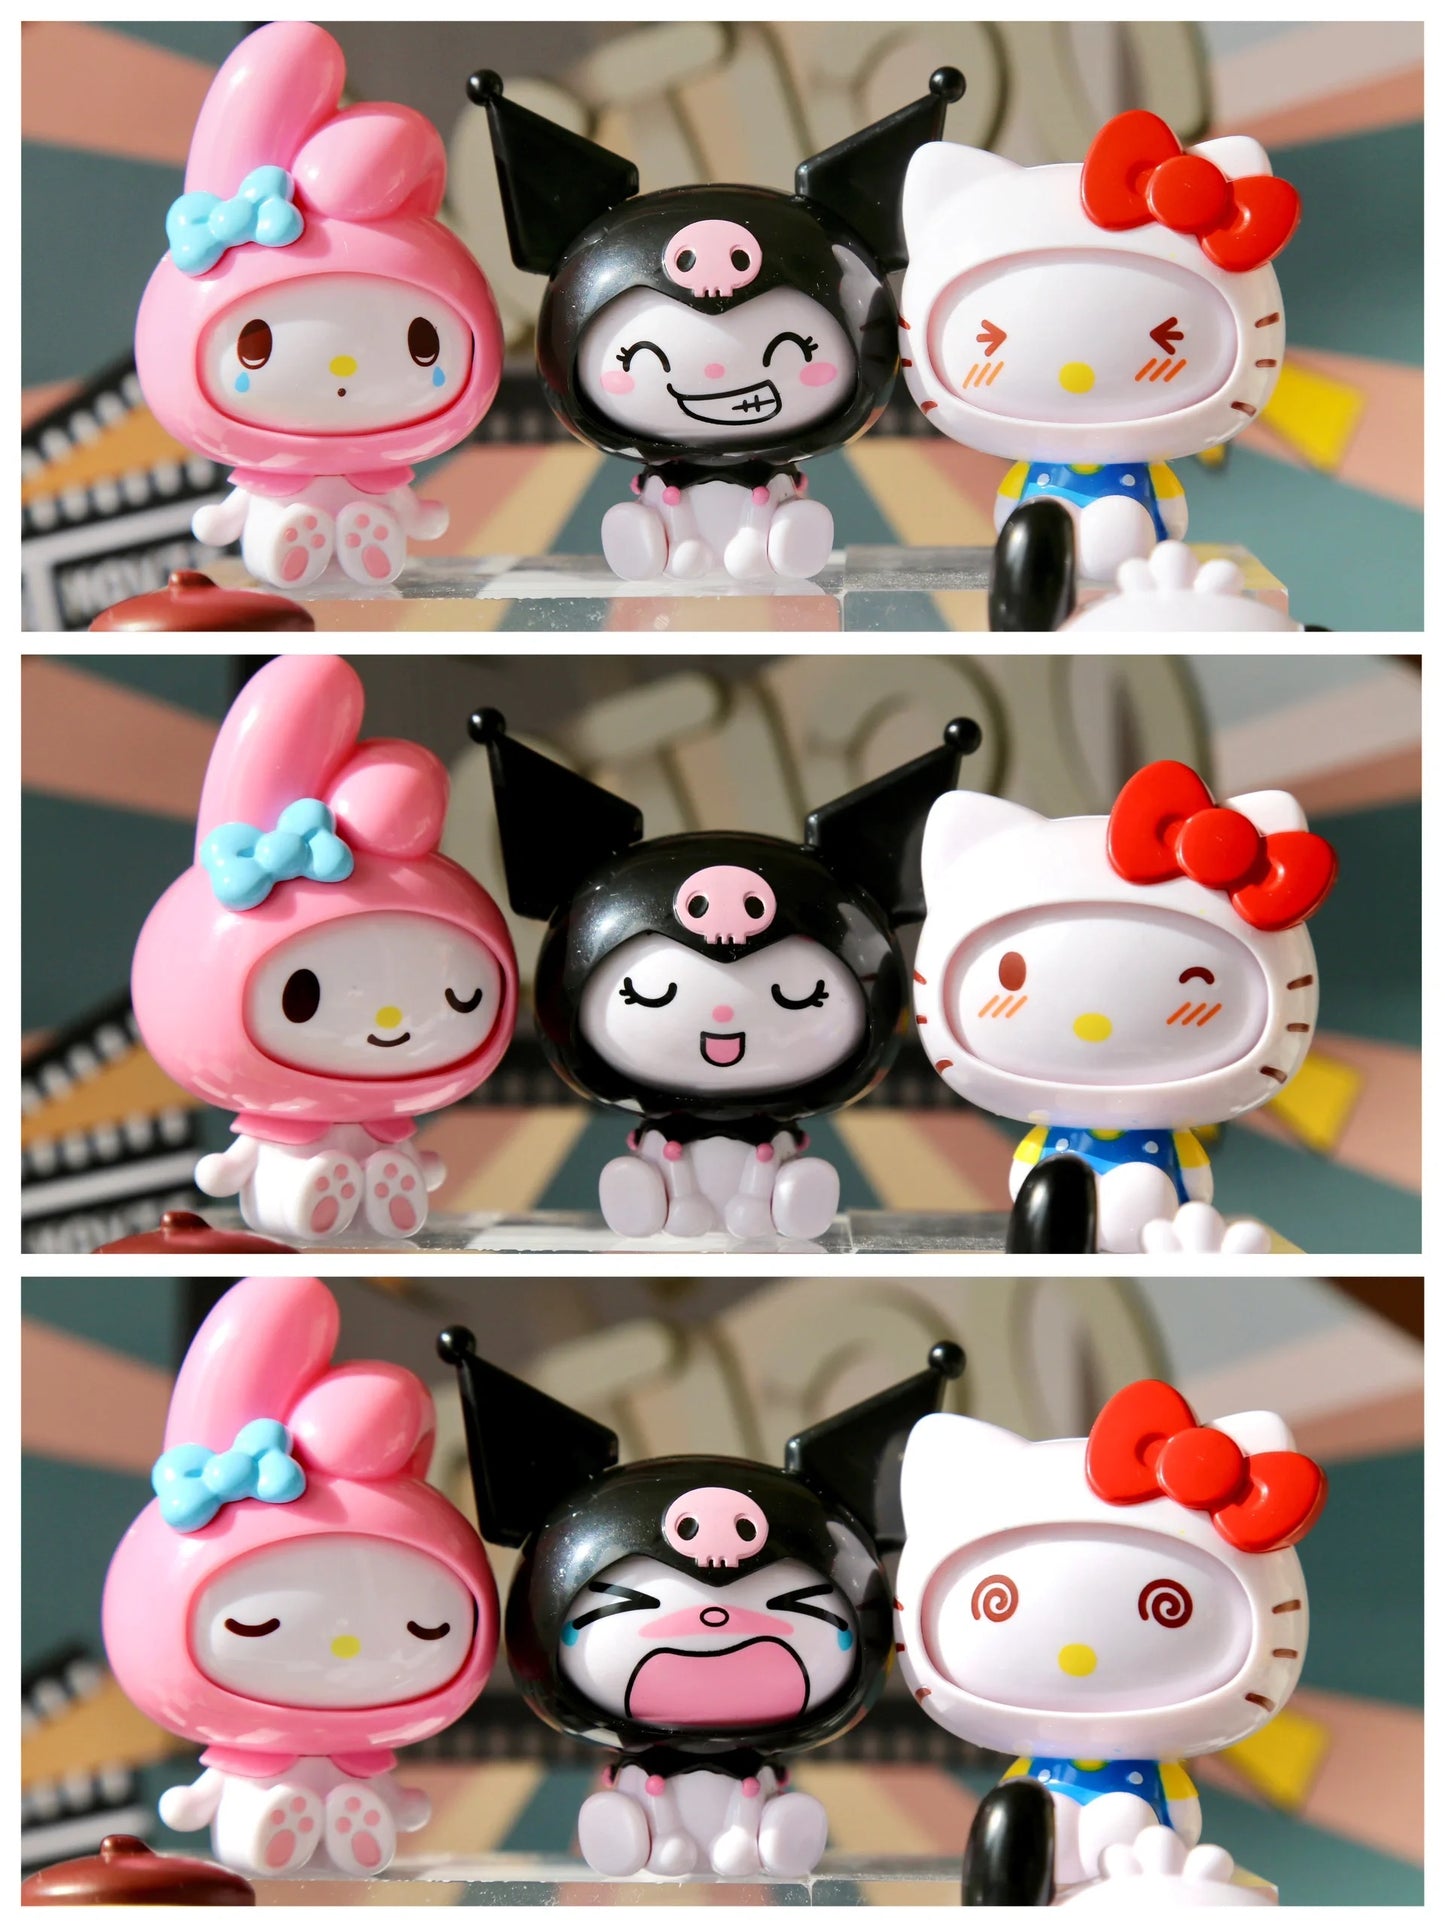 Sanrio face changing blind box